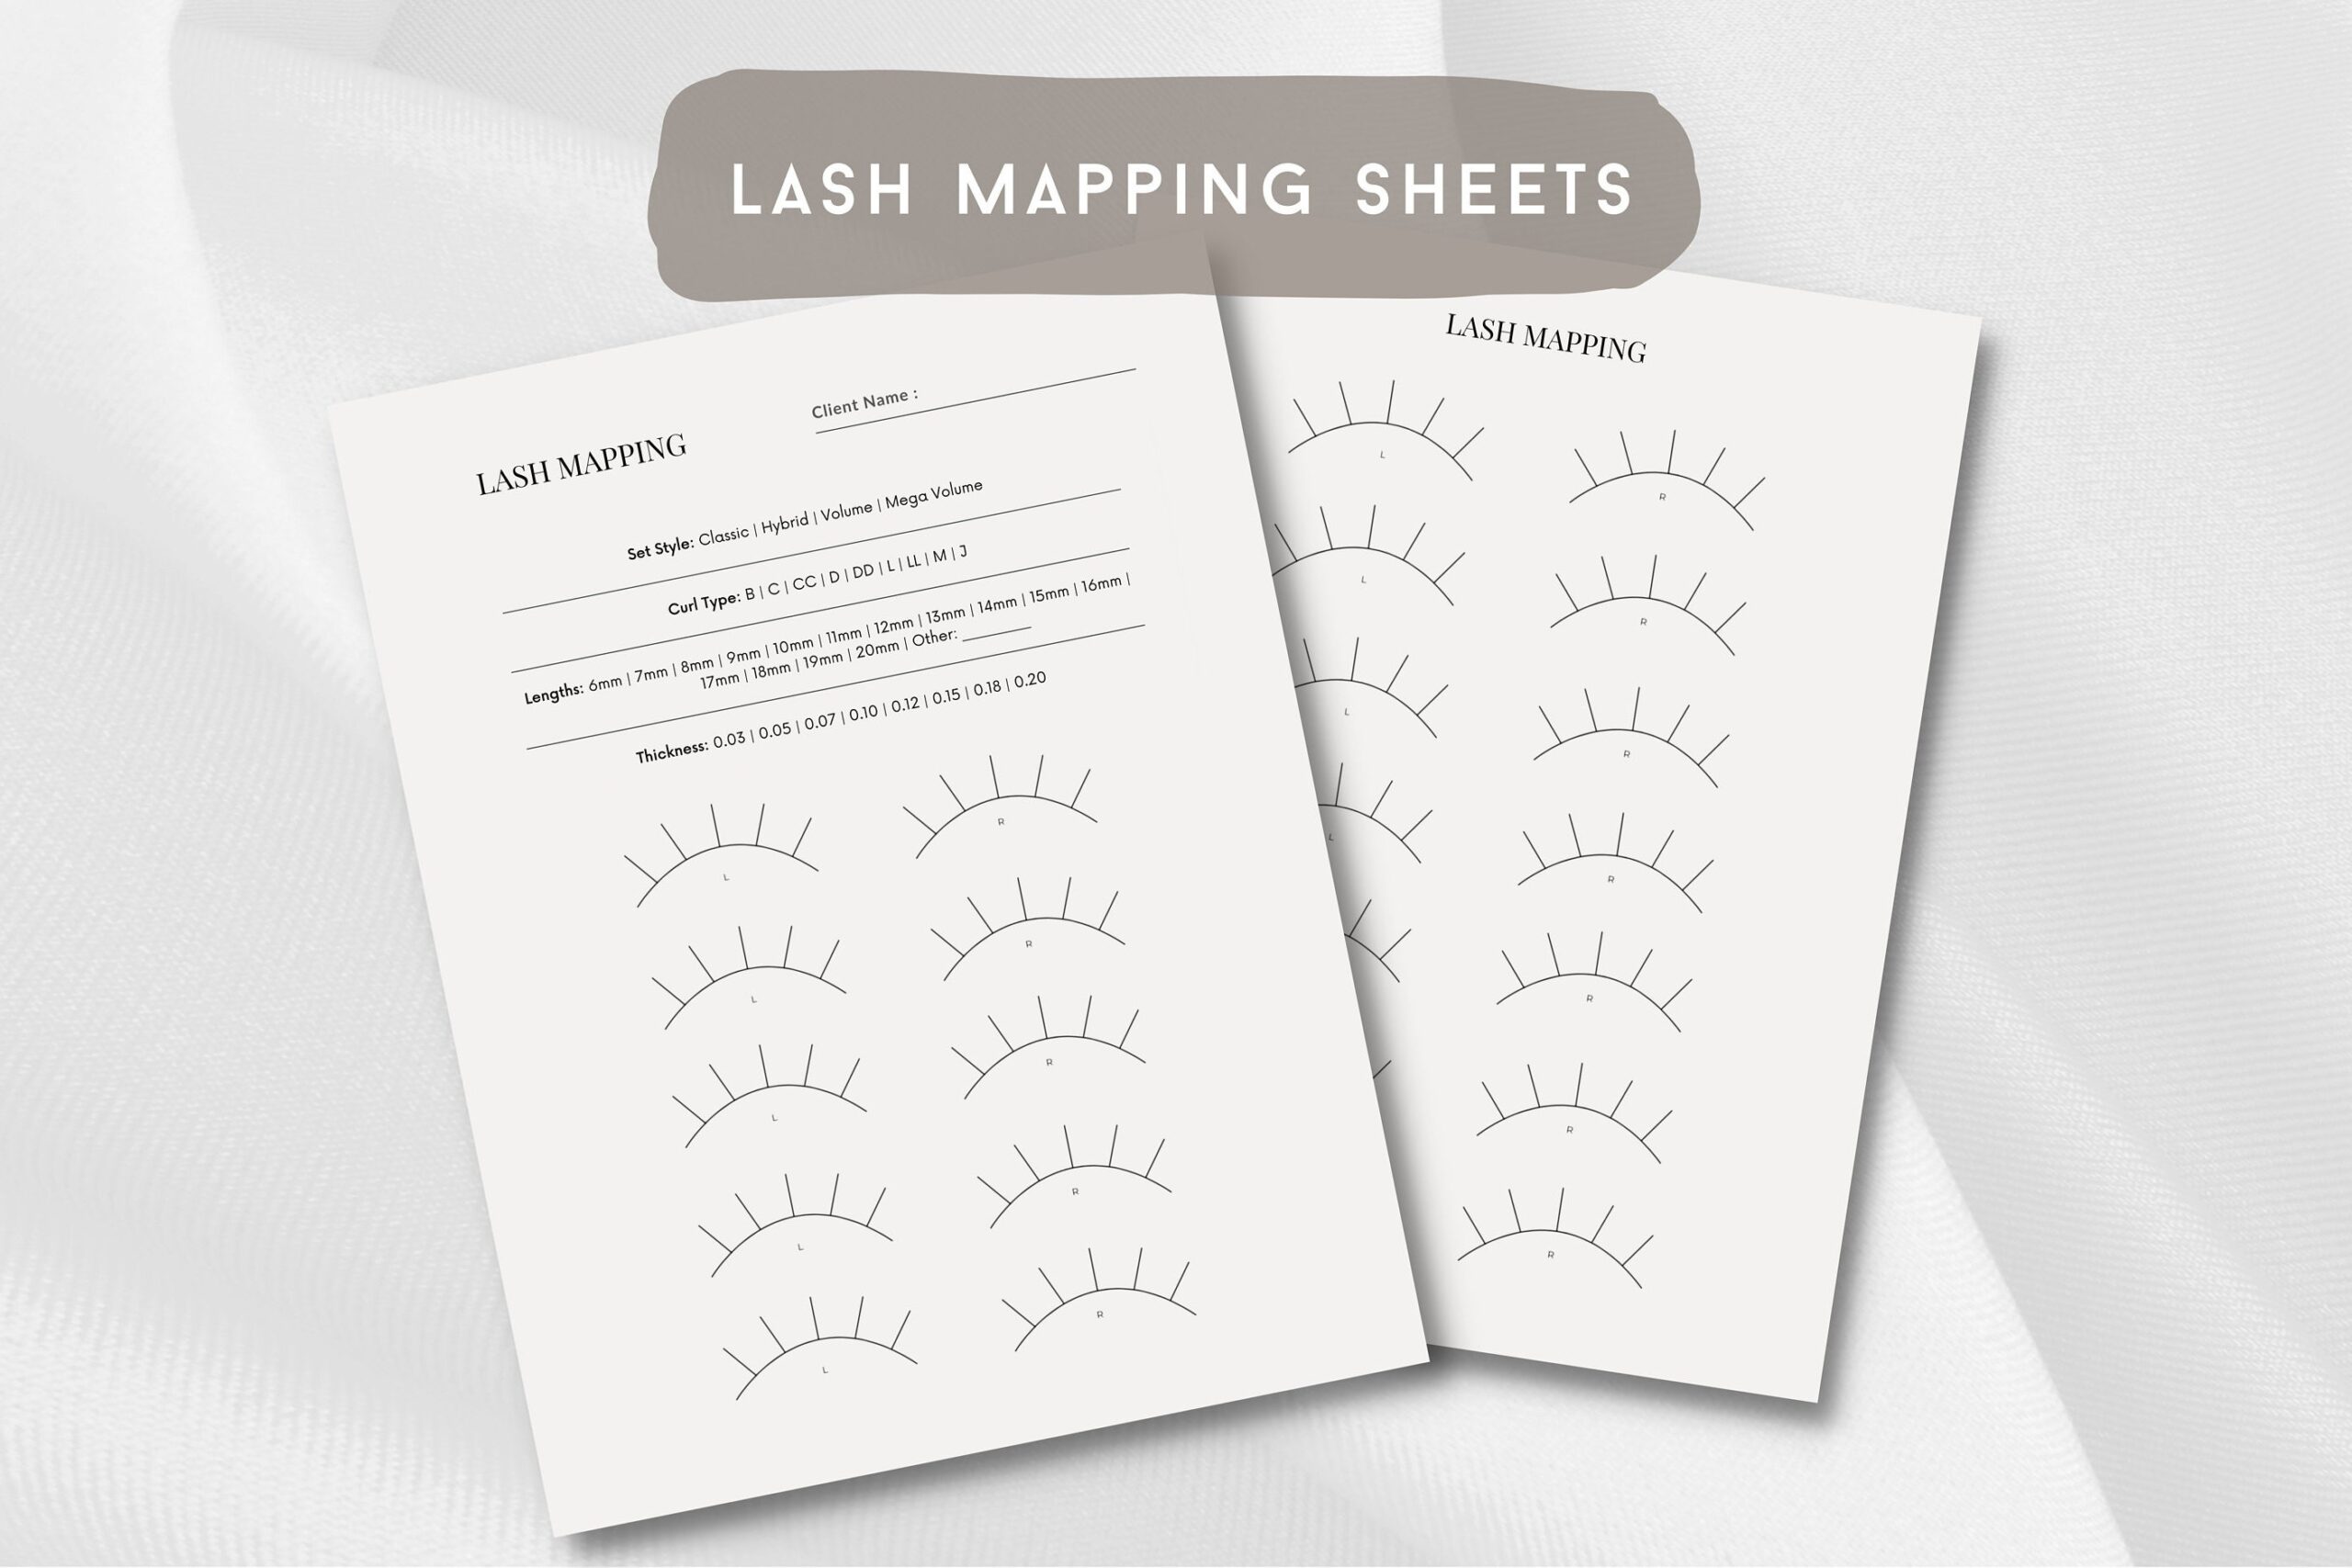 Lash Mapping Sheets Lash Mapping Templates Lash Mapping Guide Eyelash Extensions Download Printable Forms Etsy